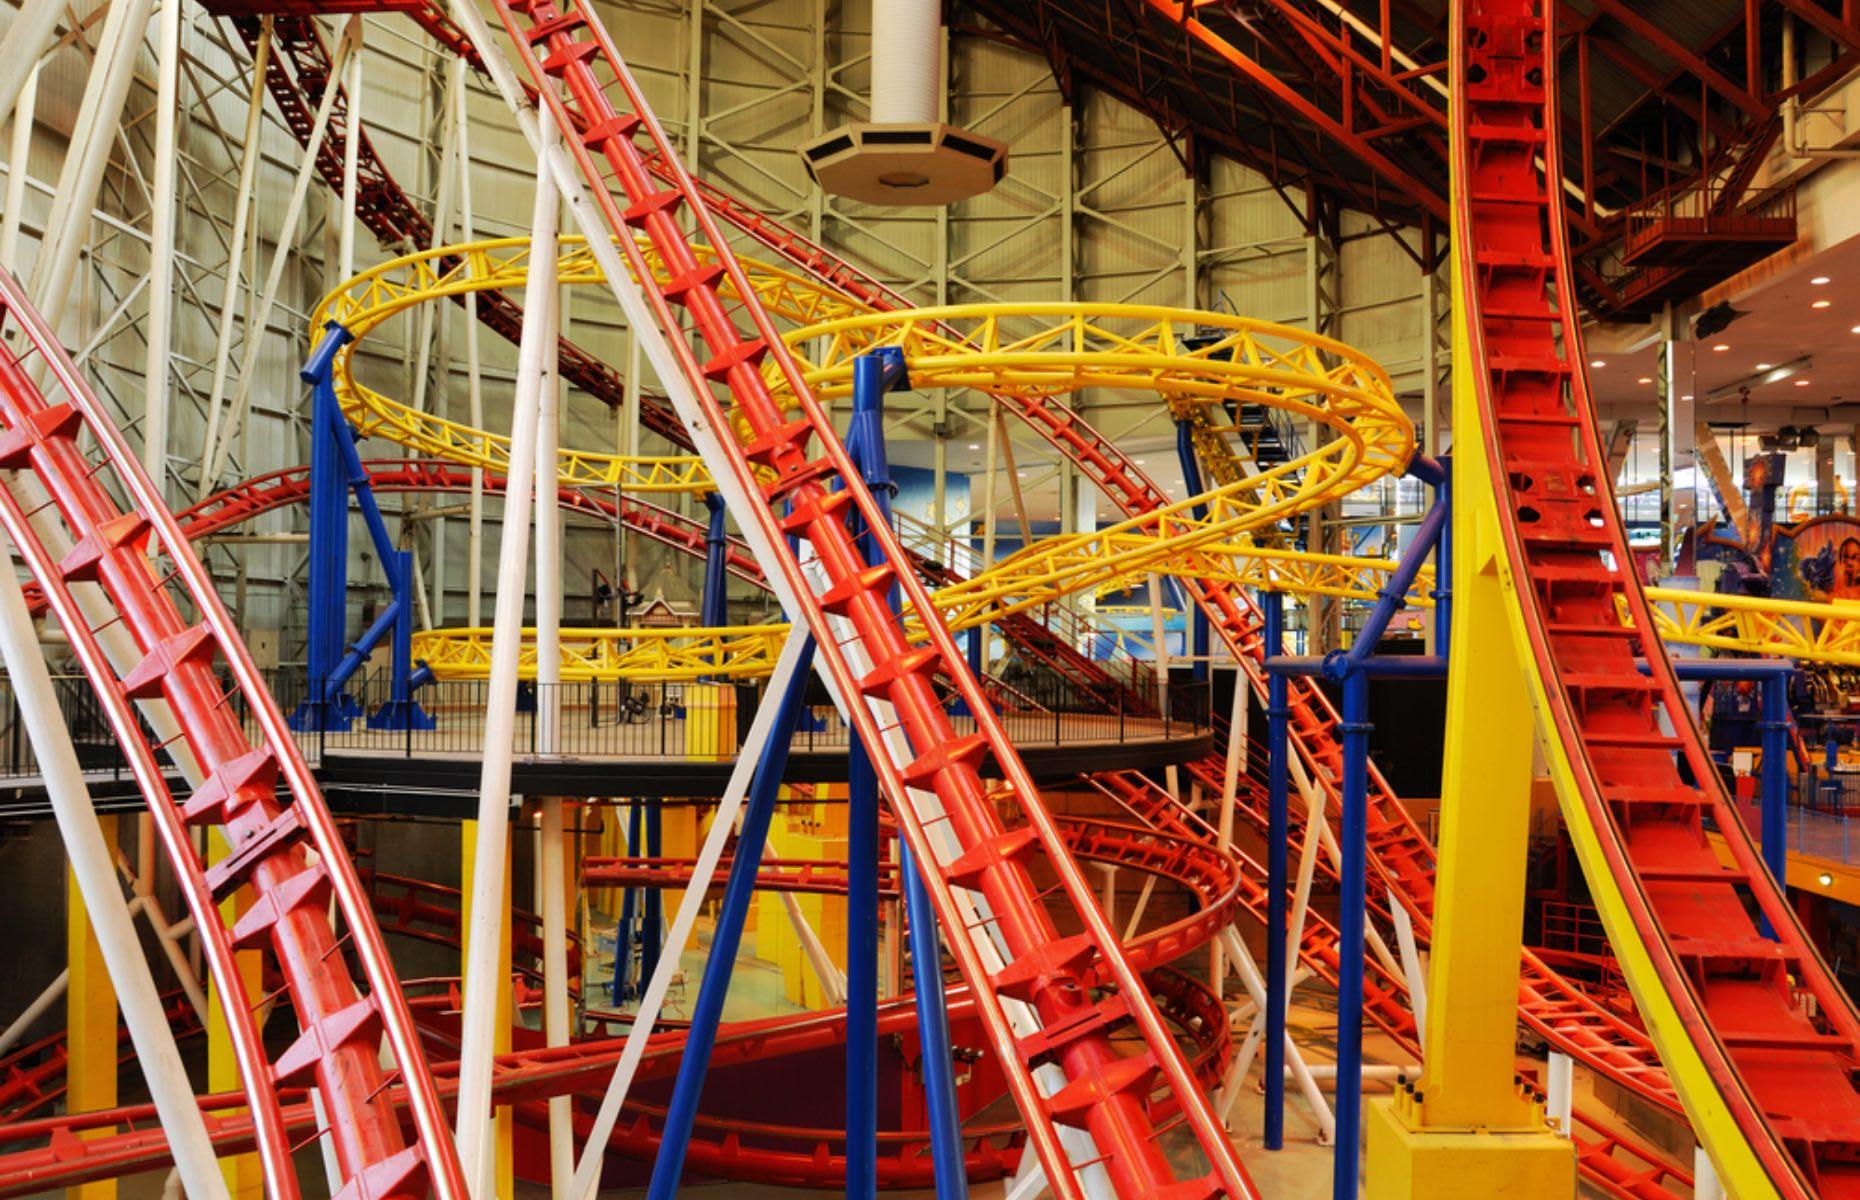 <p>Named after the not-so-scary Teenage Mutant Ninja Turtles, this incredible indoor roller coaster tops the record books for having a vertigo-inducing 121.5° vertical drop. Just 0.5° steeper than previous record-holder, Takabisha in Japan, this relatively new ride (it opened in 2019) goes from 0-62.1 miles per hour in just two seconds, before climbing a lift hill, hanging for what seems like an eternity, then descending the steepest coaster slope in the world.</p>